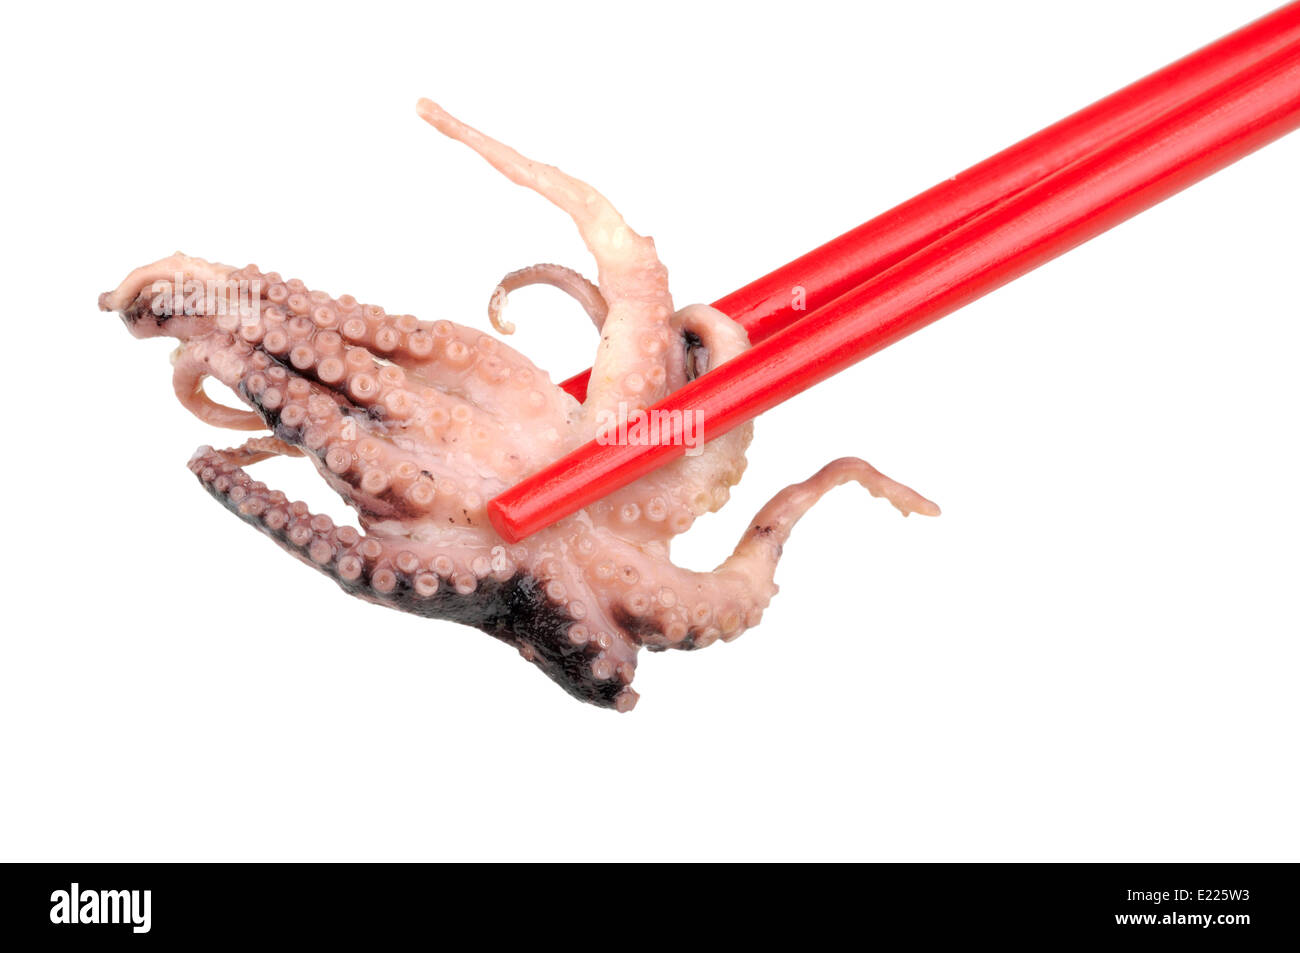 octopus in the chopstick Stock Photo